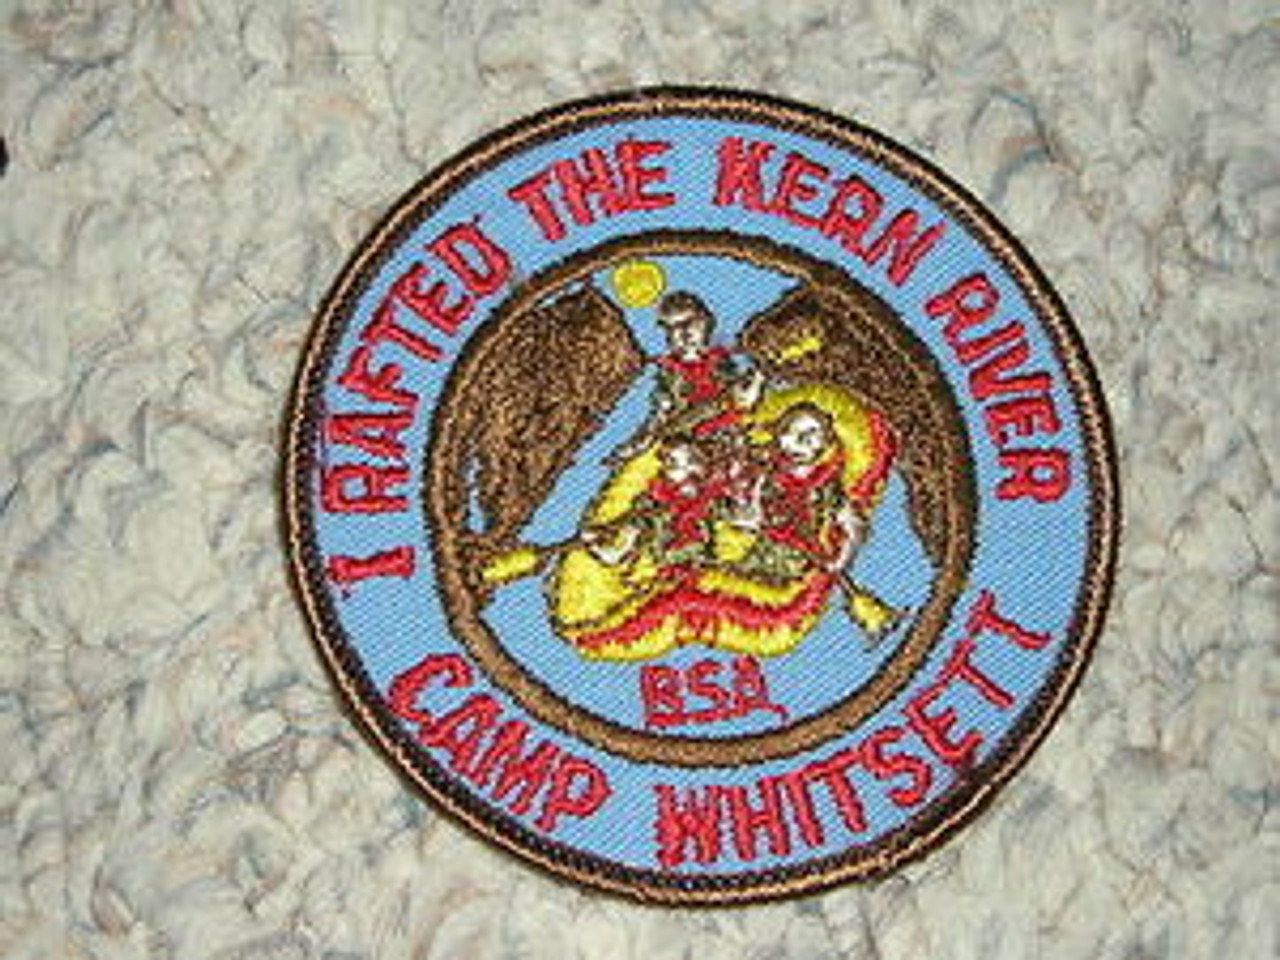 1990's Camp Whitsett River Rafting Patch - Scout